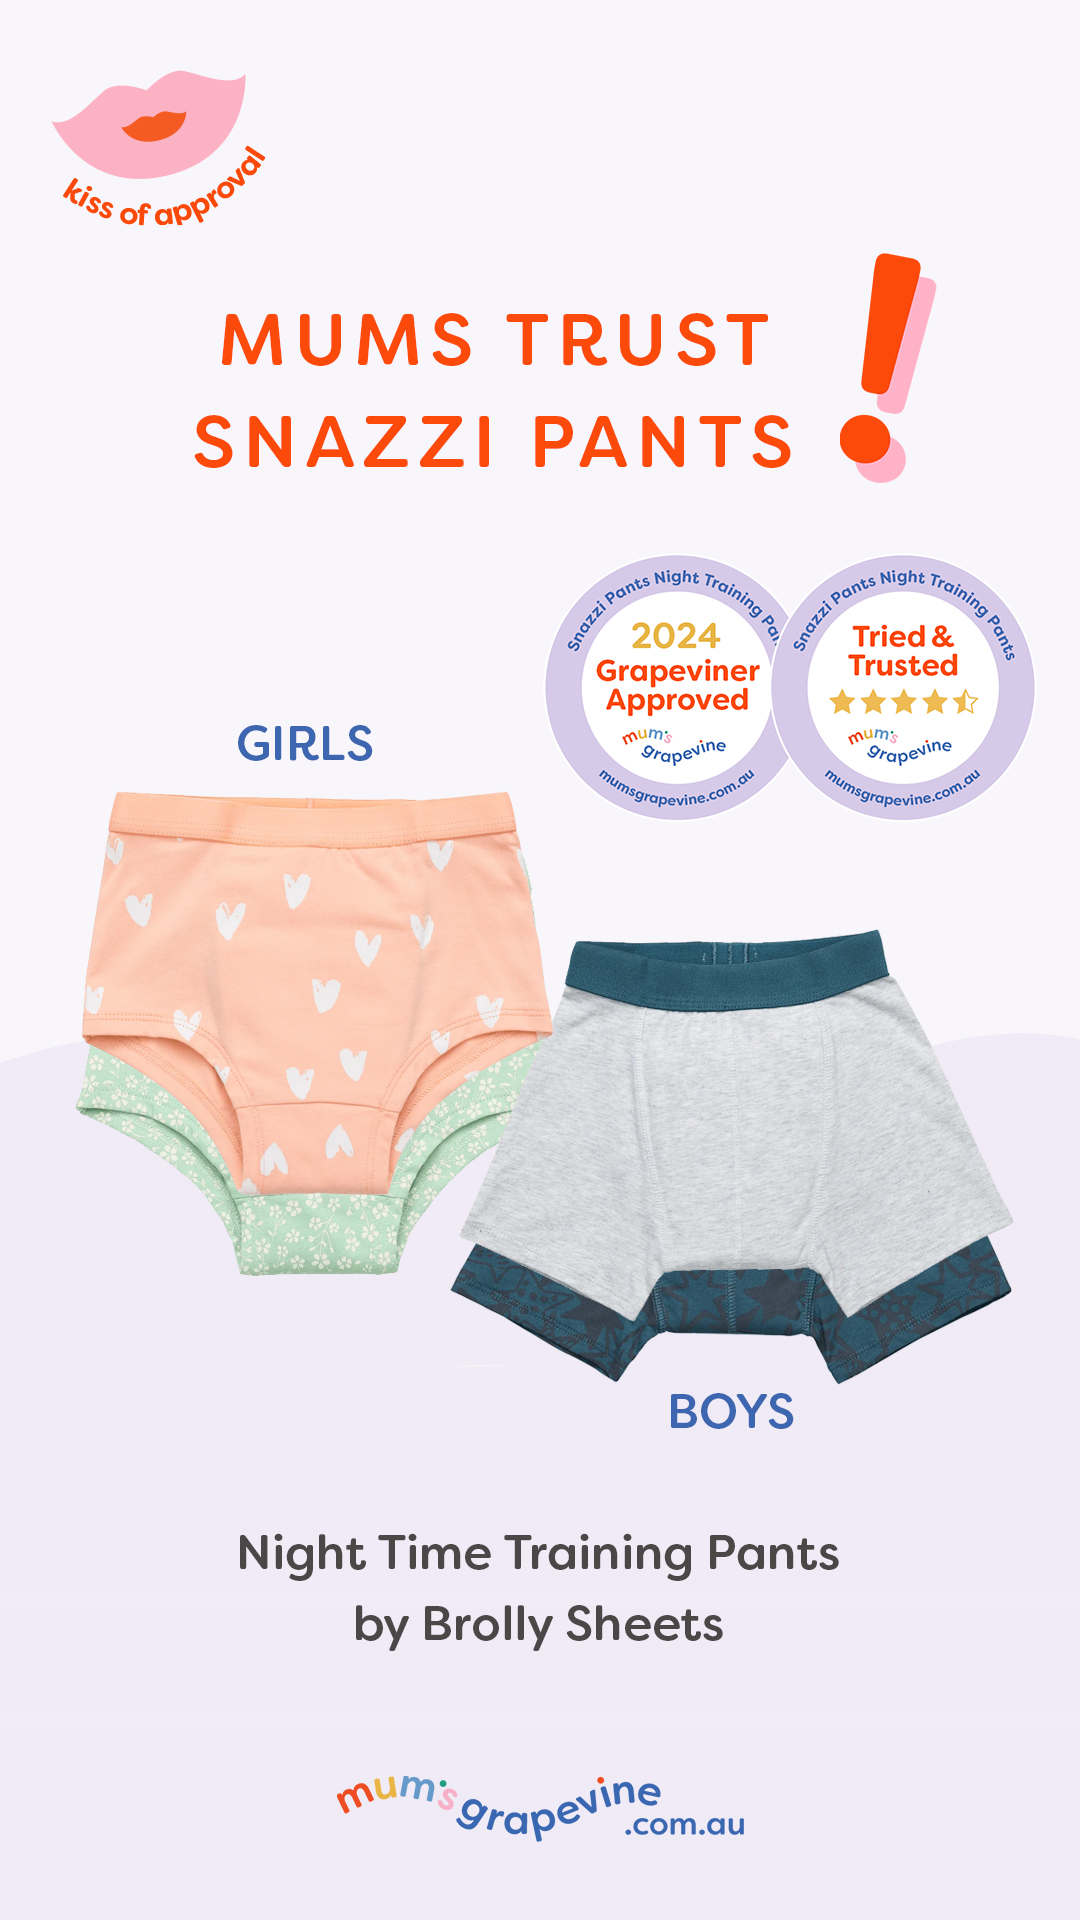 Illustration of Snazzi Pants Night Training Pants with 4.5 star review badge